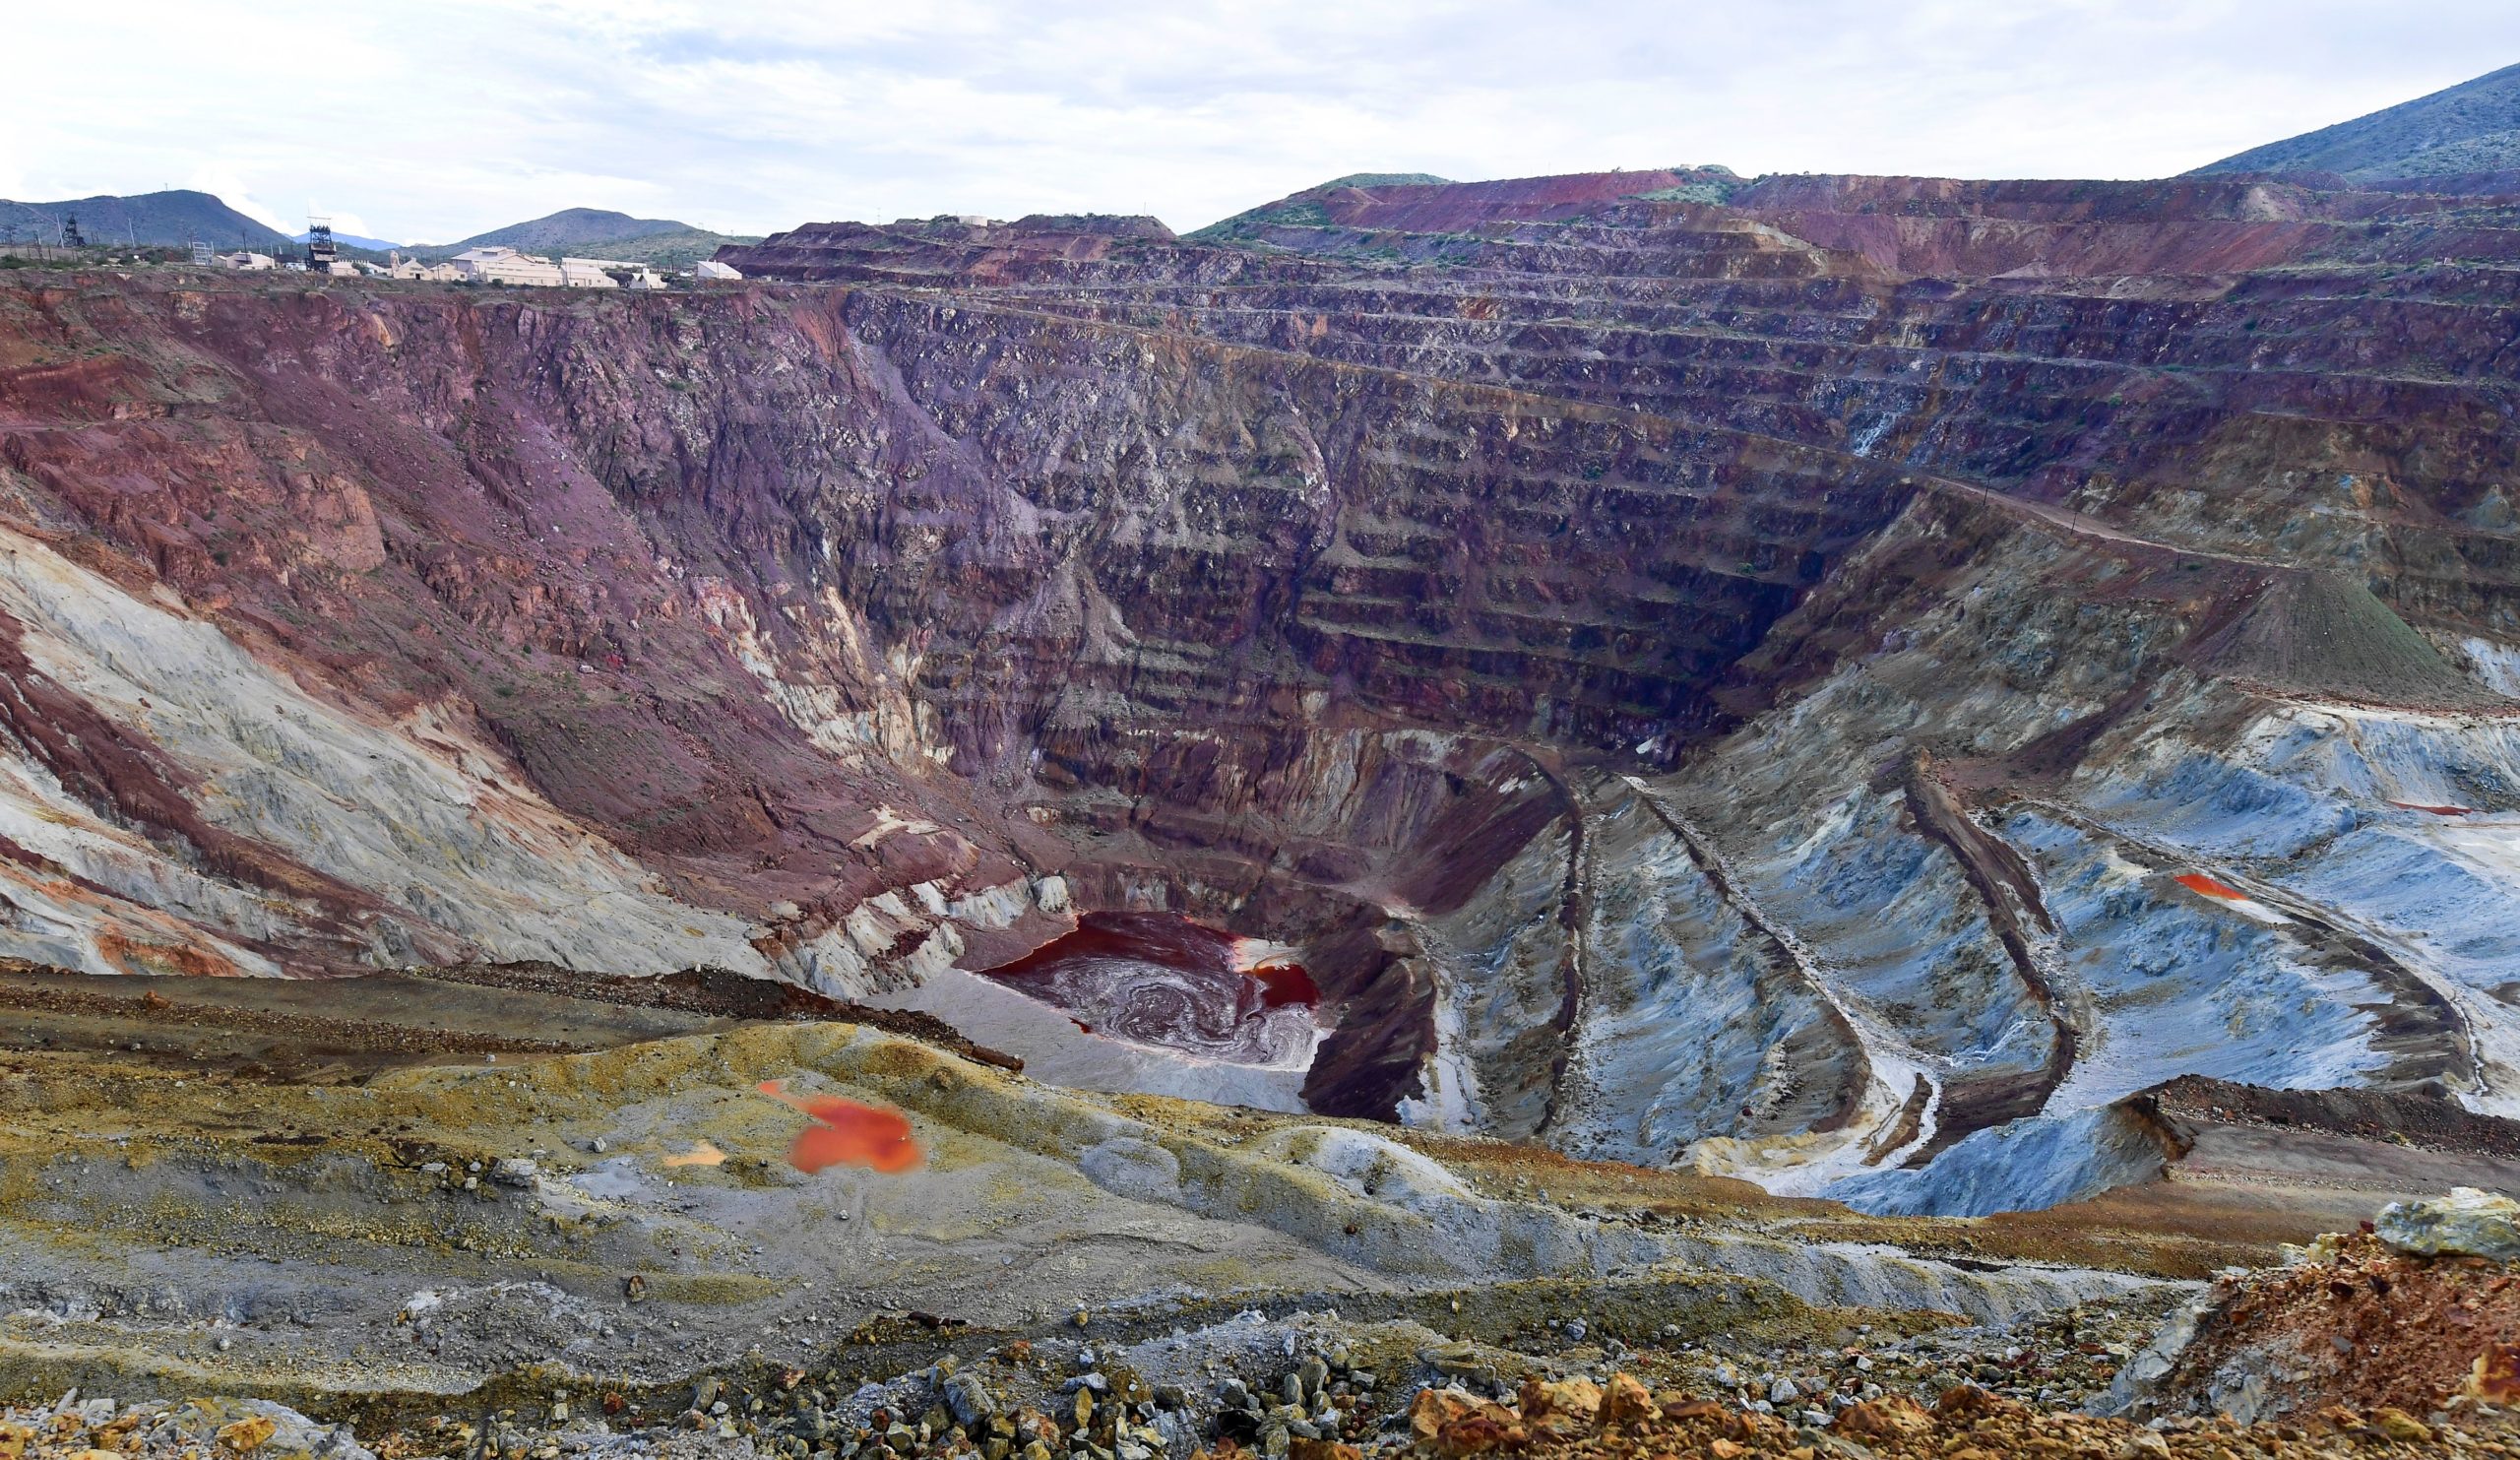 The Lavendar Pit at Copper Queen Mine in Bisbee, Arizona pictured on July 24, 2020. (Frederic J. Brown/AFP via Getty Images)